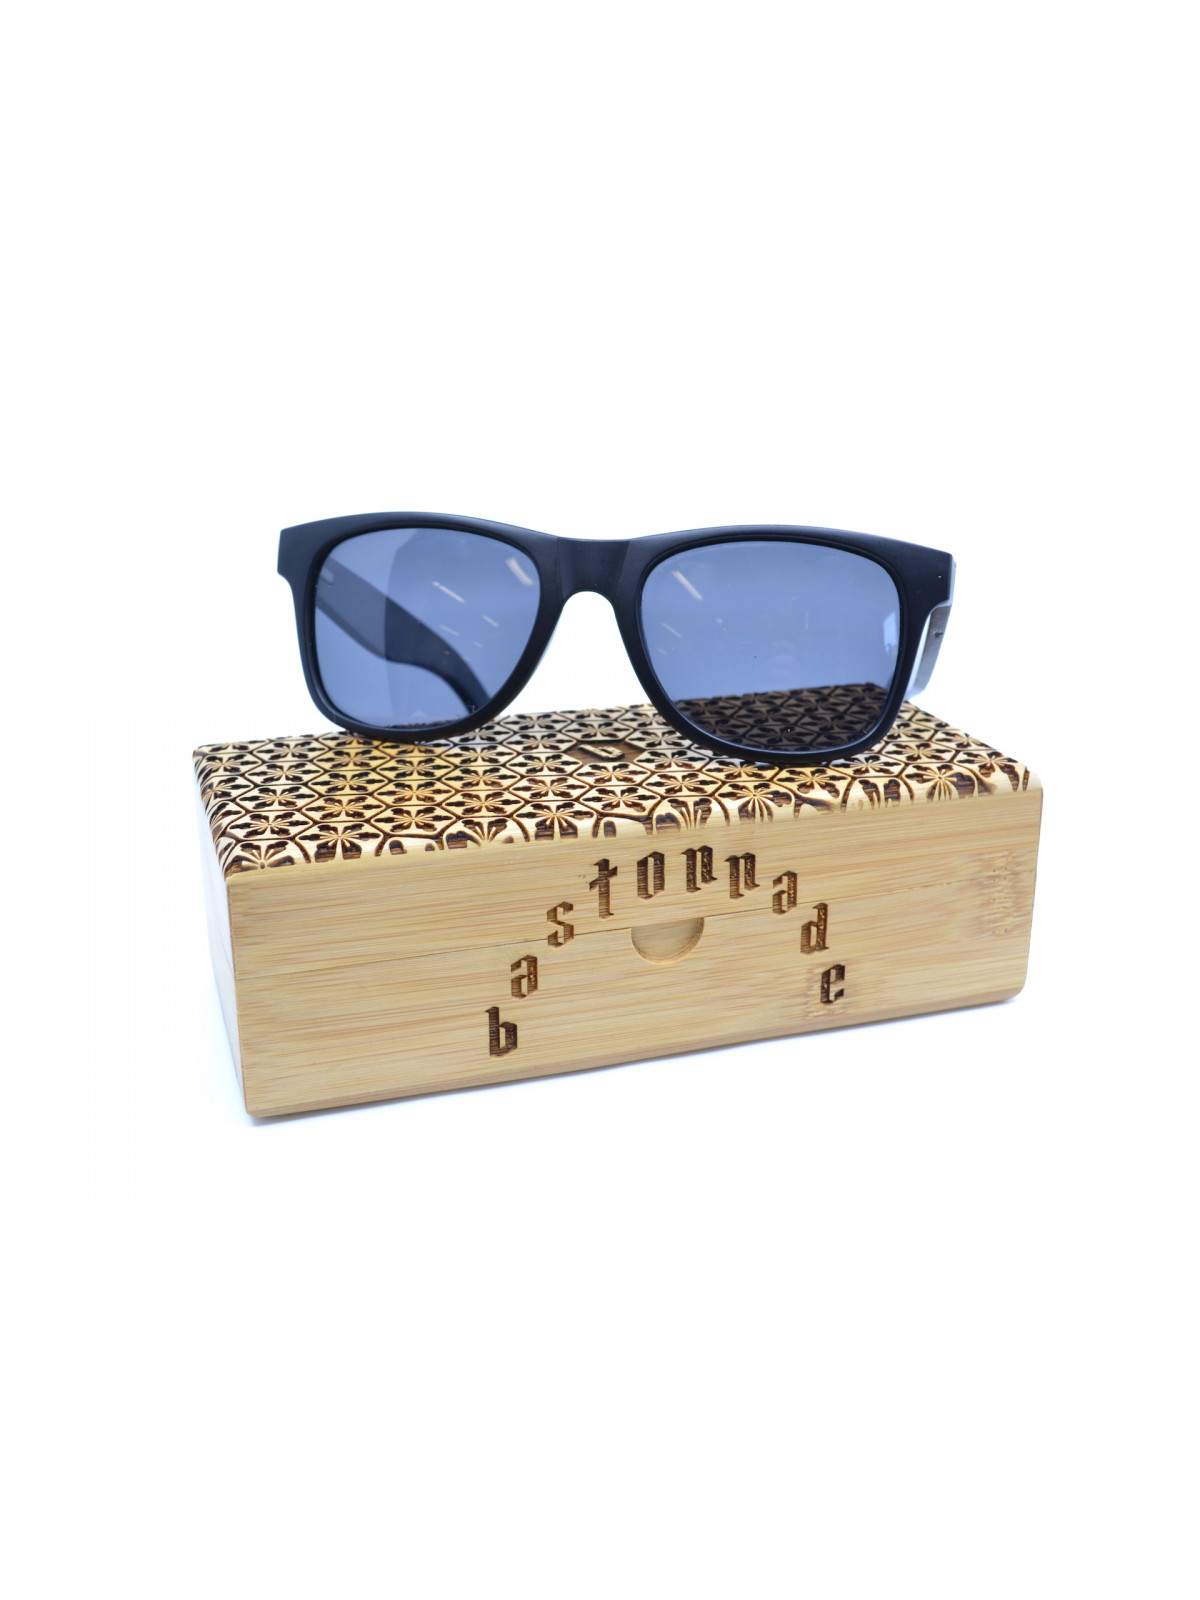 Wooden sunglasses and its box for men and women by swiss streetwear brand bastonnade clothing.